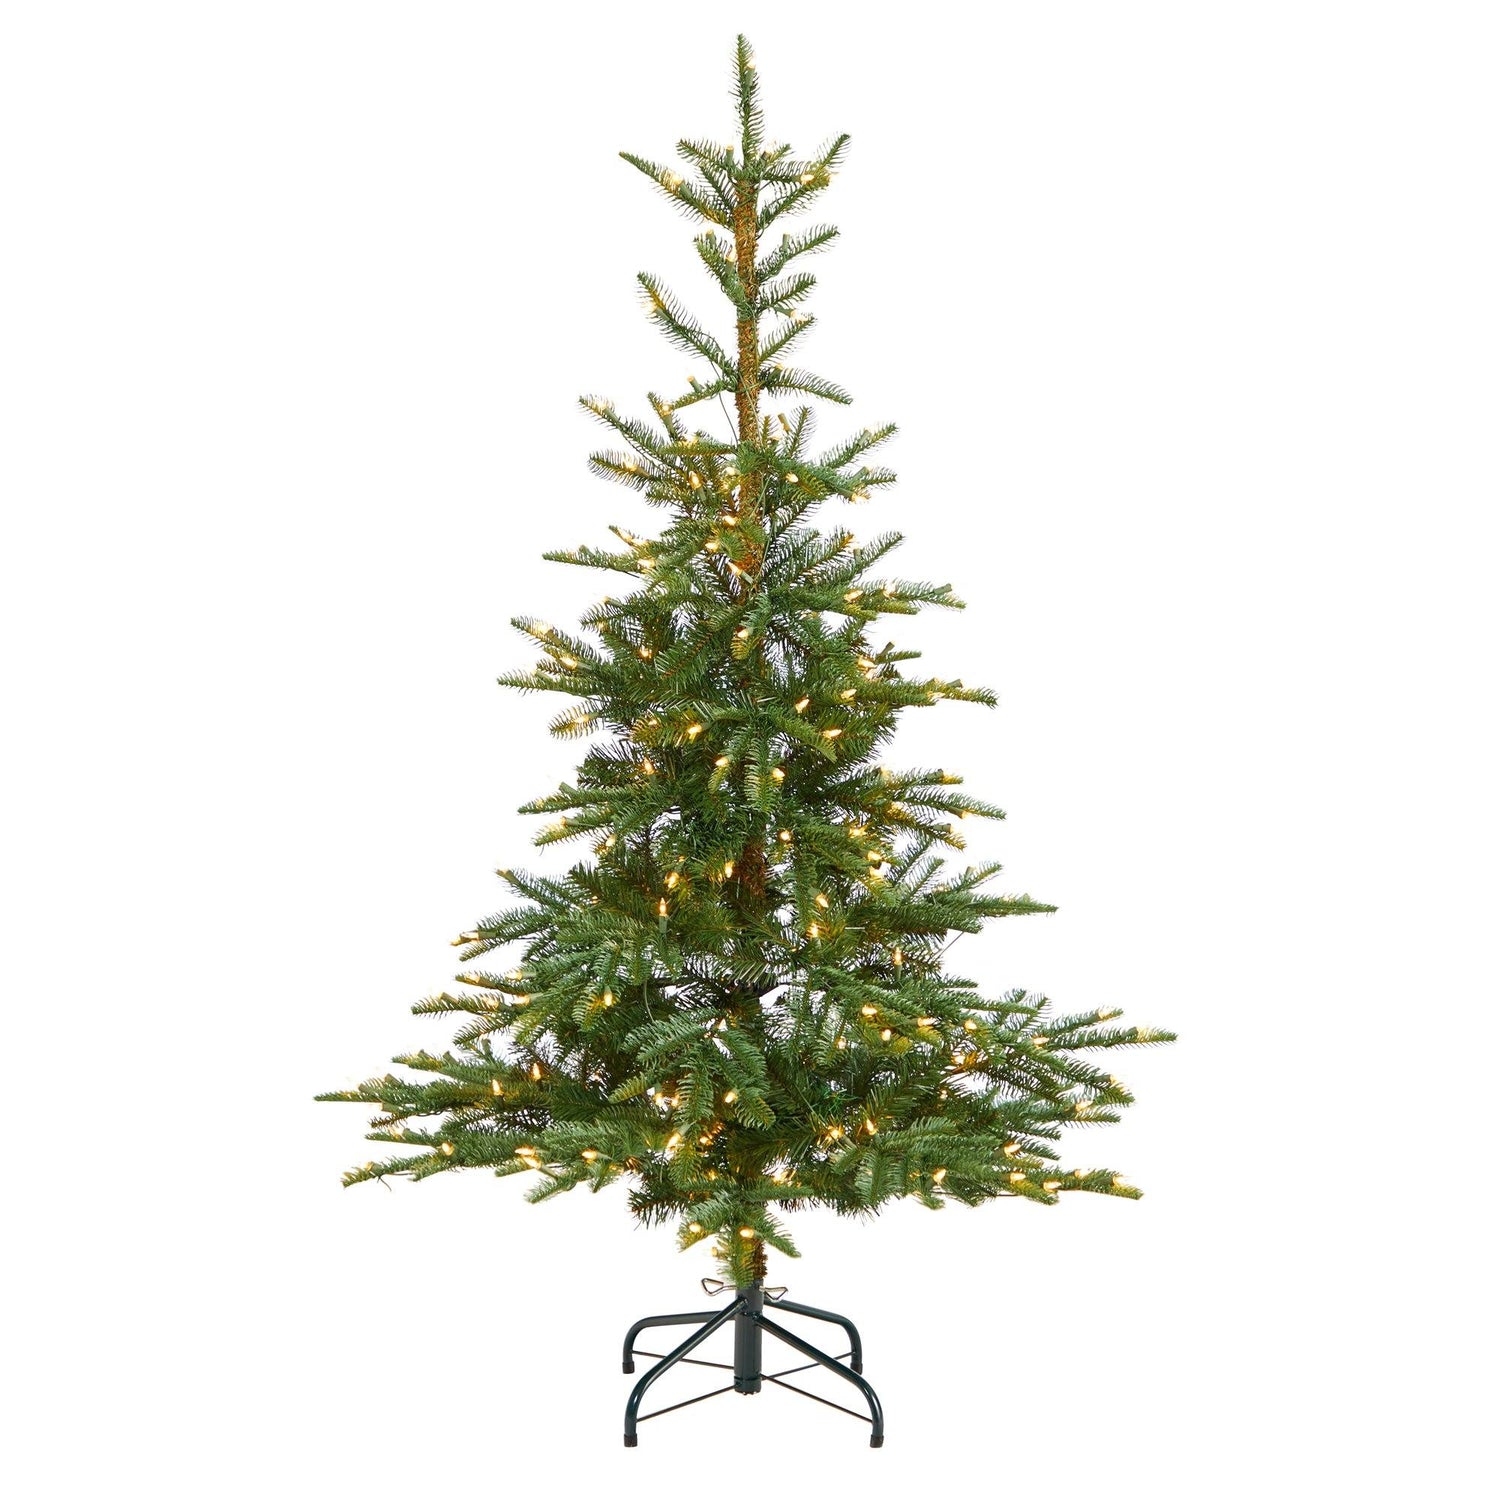 Irjat Green Fir Flocked/Frosted Christmas Tree The Holiday Aisle Size: 6